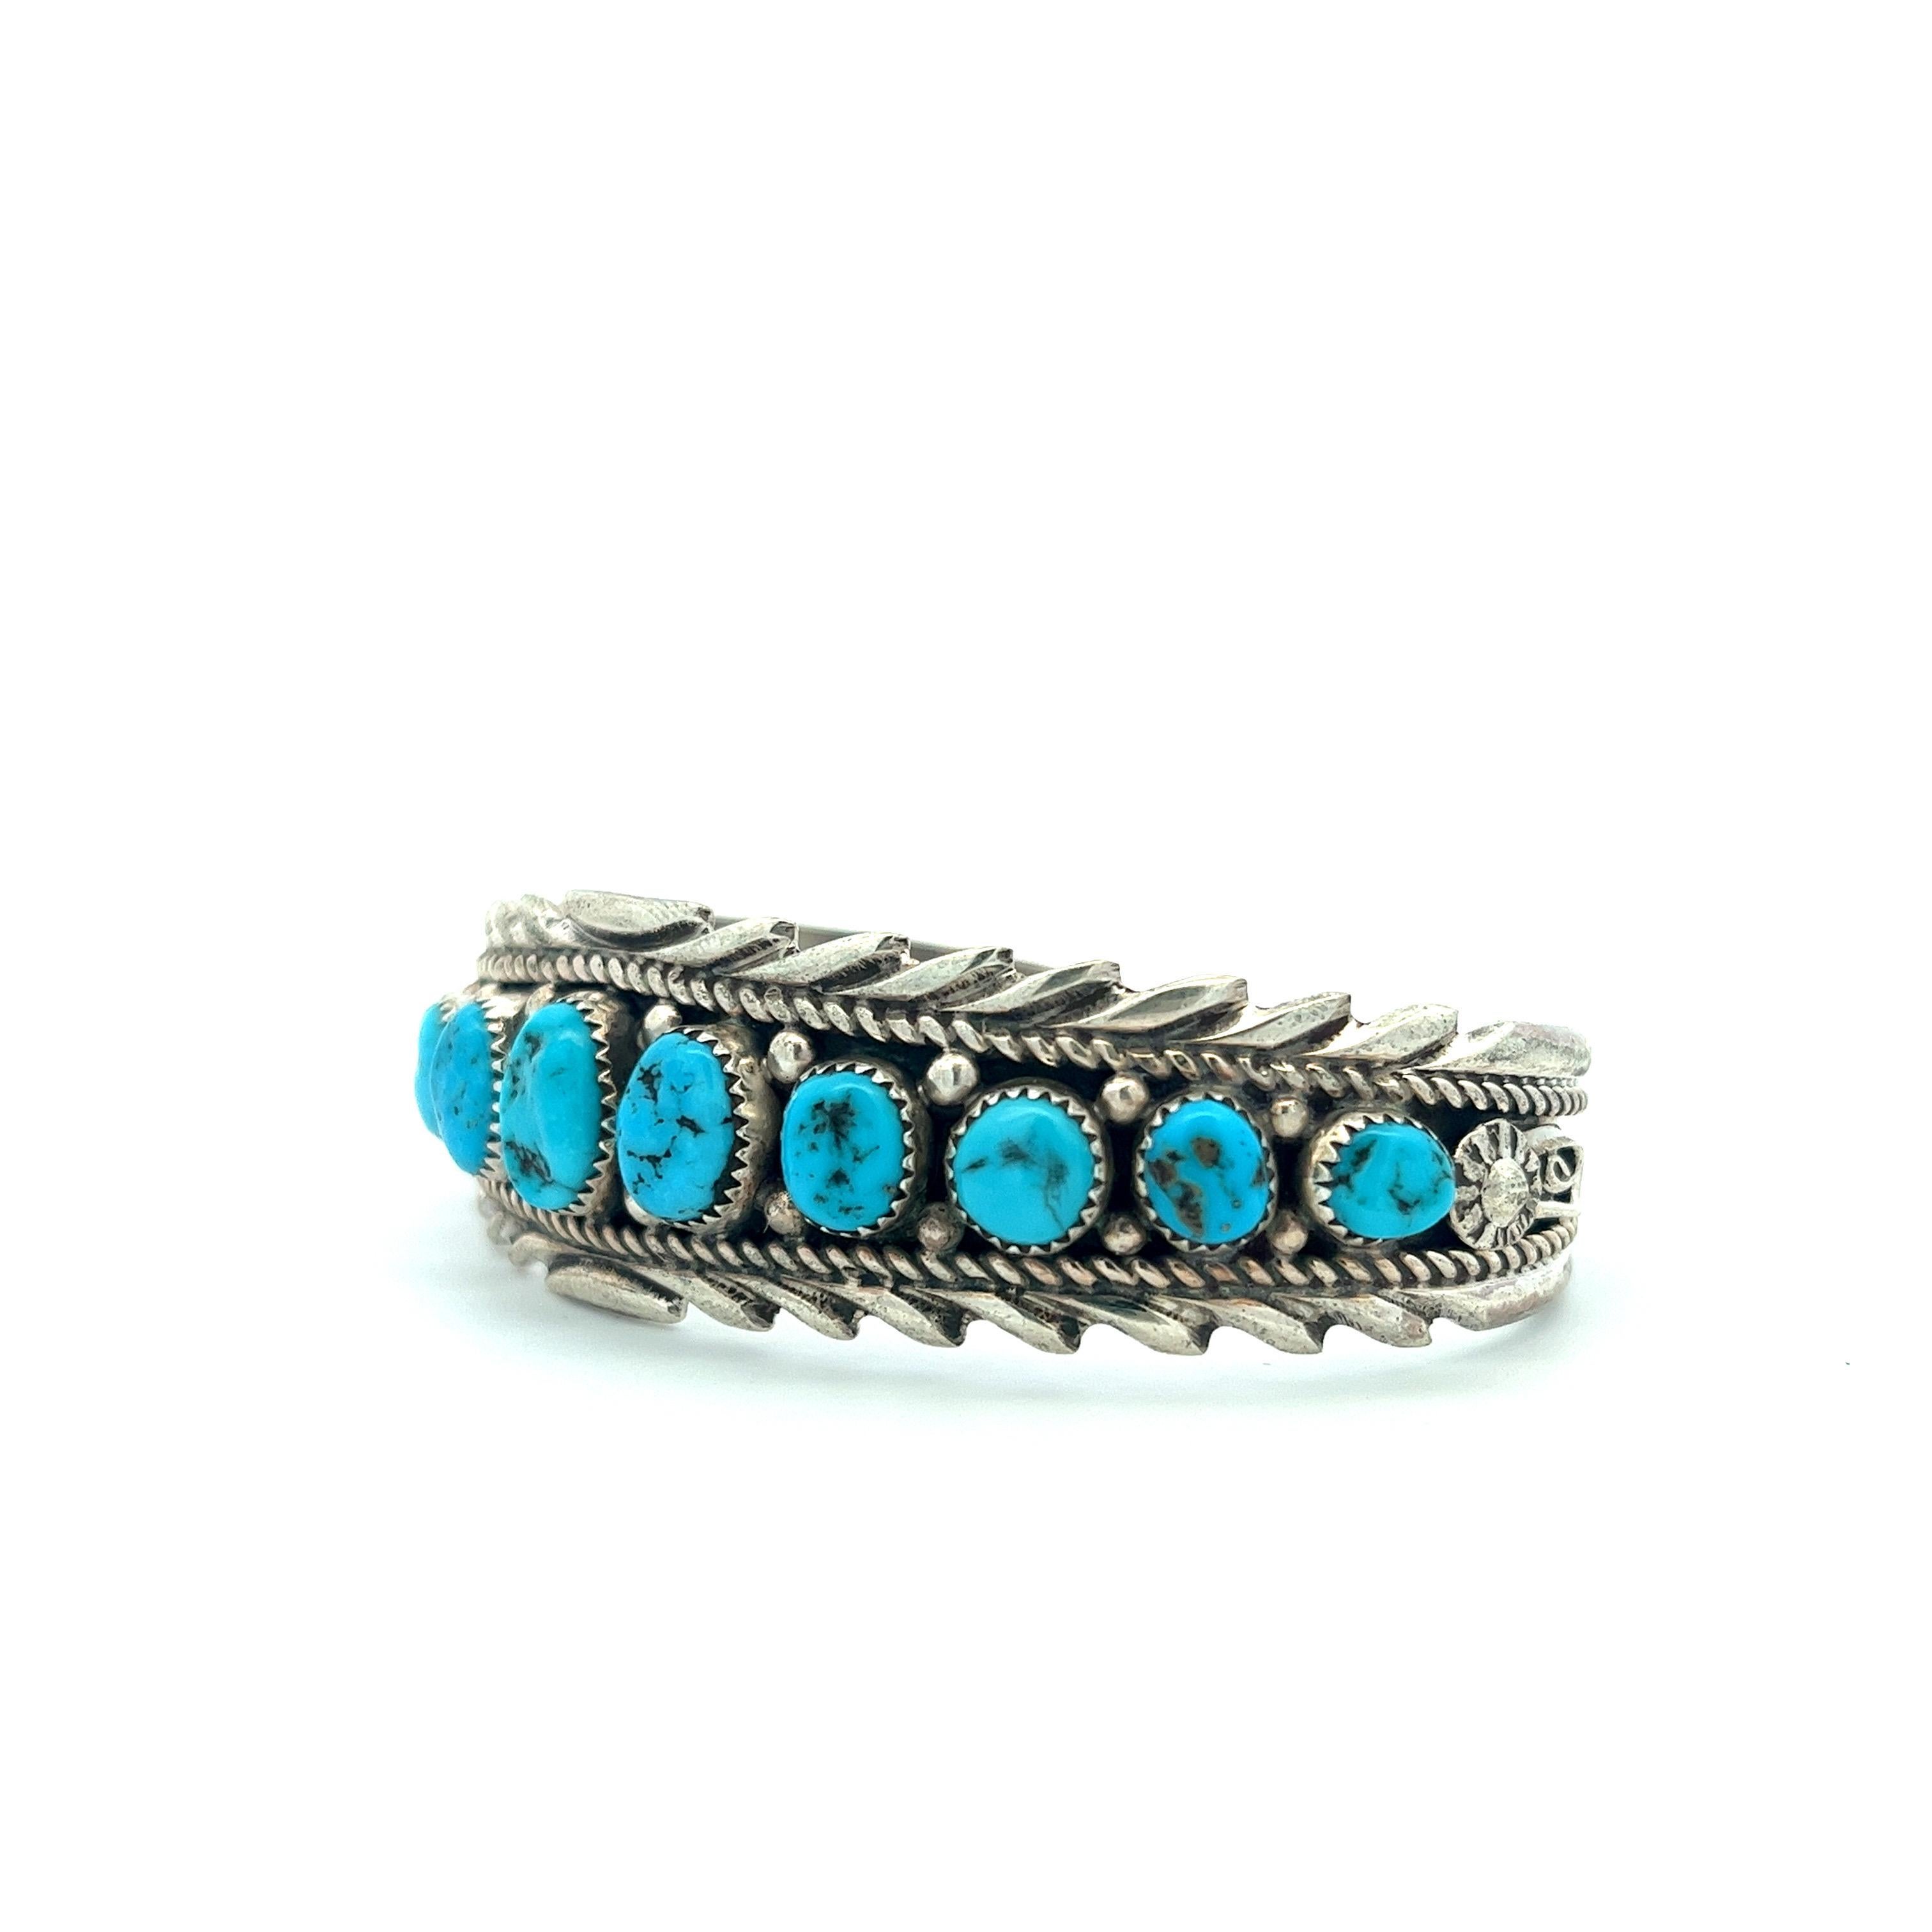 This timeless, heirloom-quality Navajo Kingman turquoise bracelet is a testament to vintage elegance and the remarkable craftsmanship of the renowned silversmith, Anthony Brown. The bracelet showcases eleven meticulously bezel-set, oval-shaped